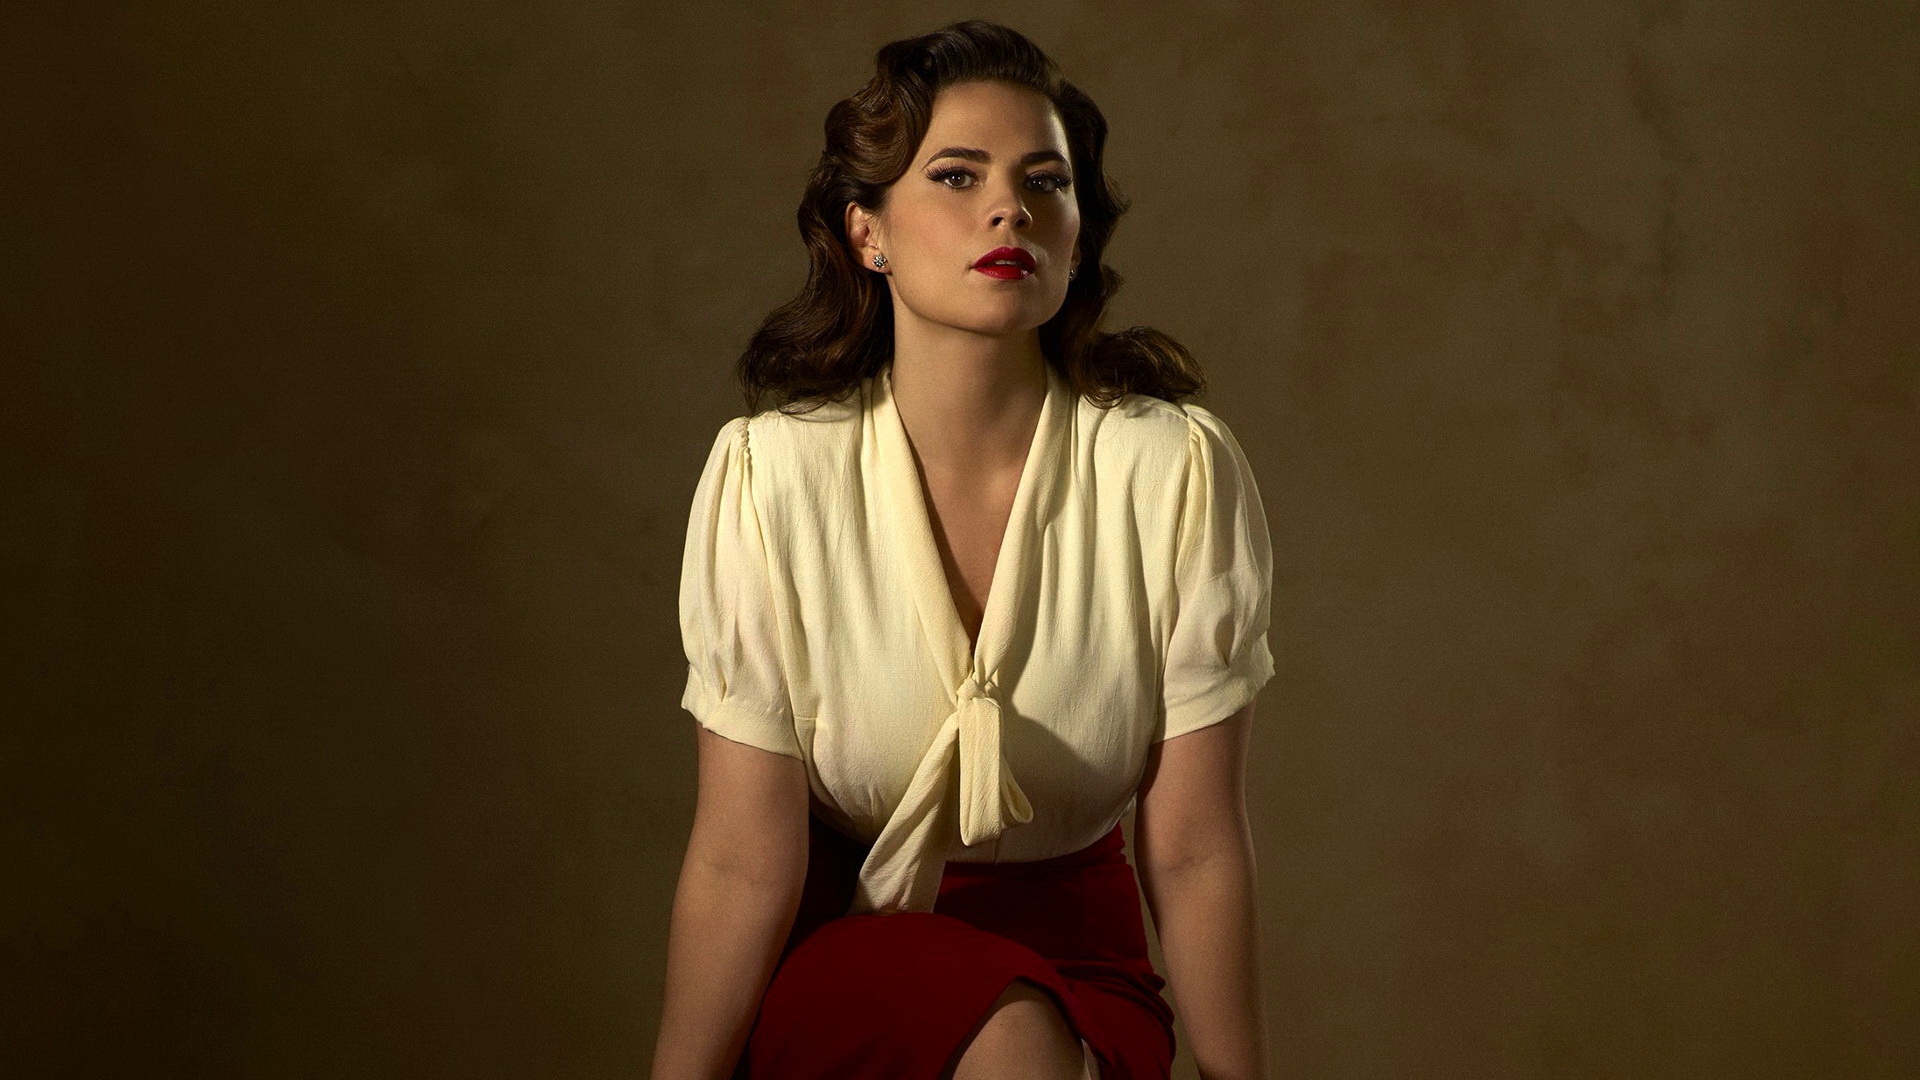 Free photo Actress Hayley Atwell sits against a dark background